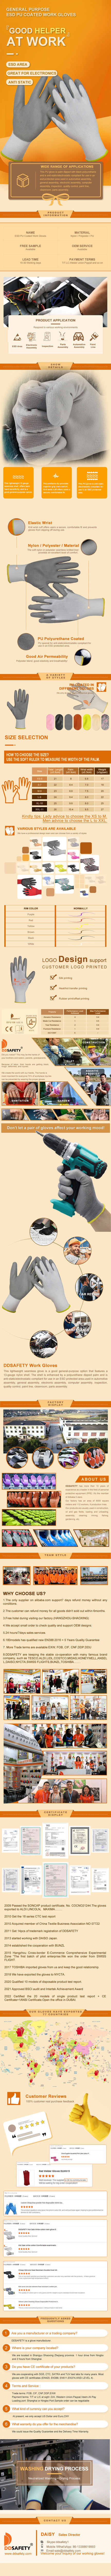 Gray Static proof ESD Ultra-Thin Polyurethane PU Coated Safety Work Gloves-DPU108 Gray Static proof ESD Ultra-Thin Polyurethane PU Coated Safety Work Gloves-DPU108 gloves,pu gloves,static proof gloves,work gloves